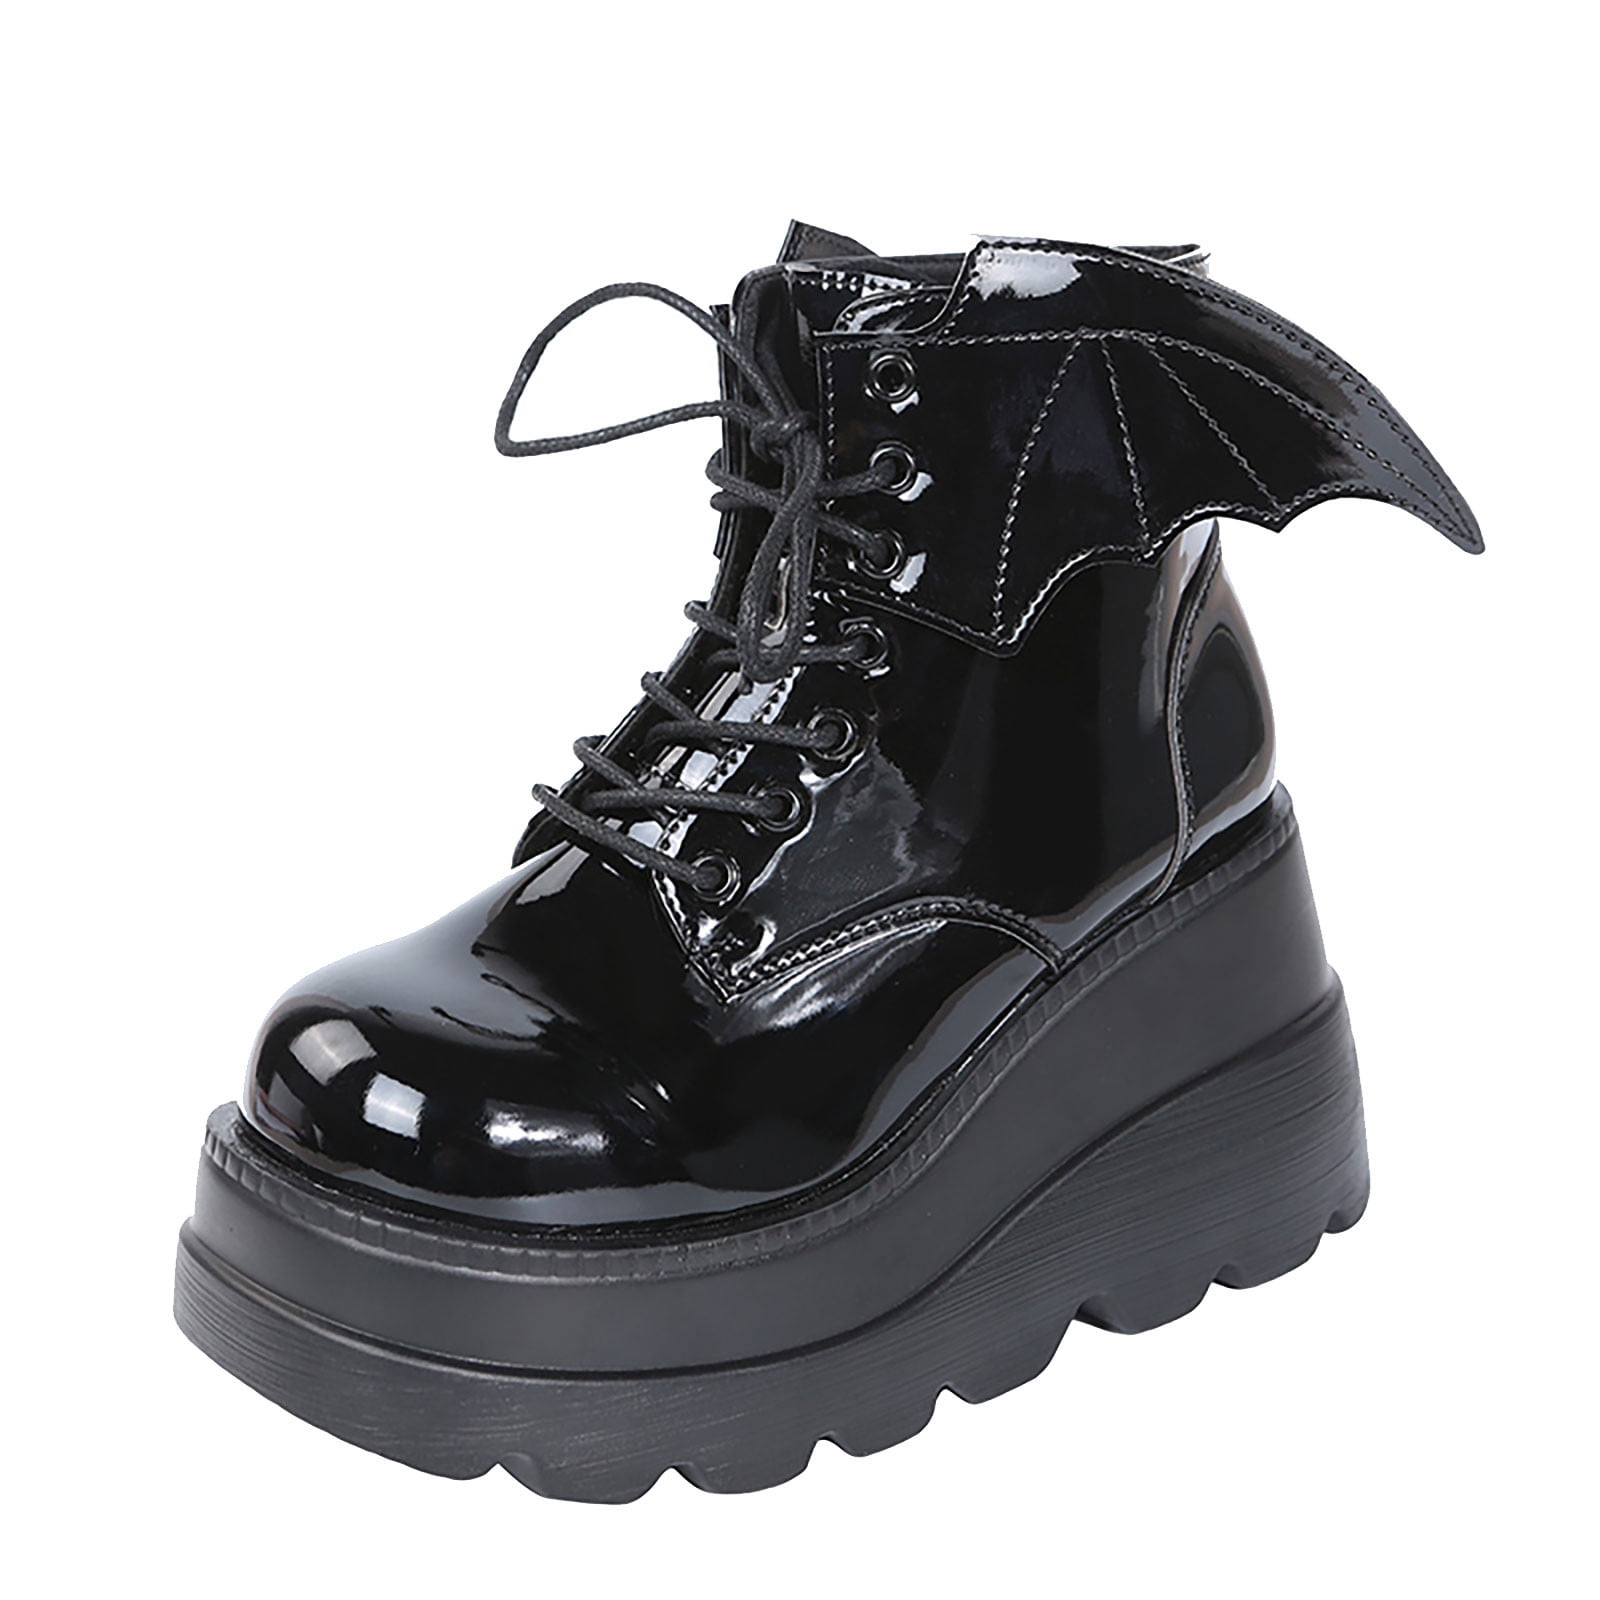 Patent Leather Shiny Goth Boots